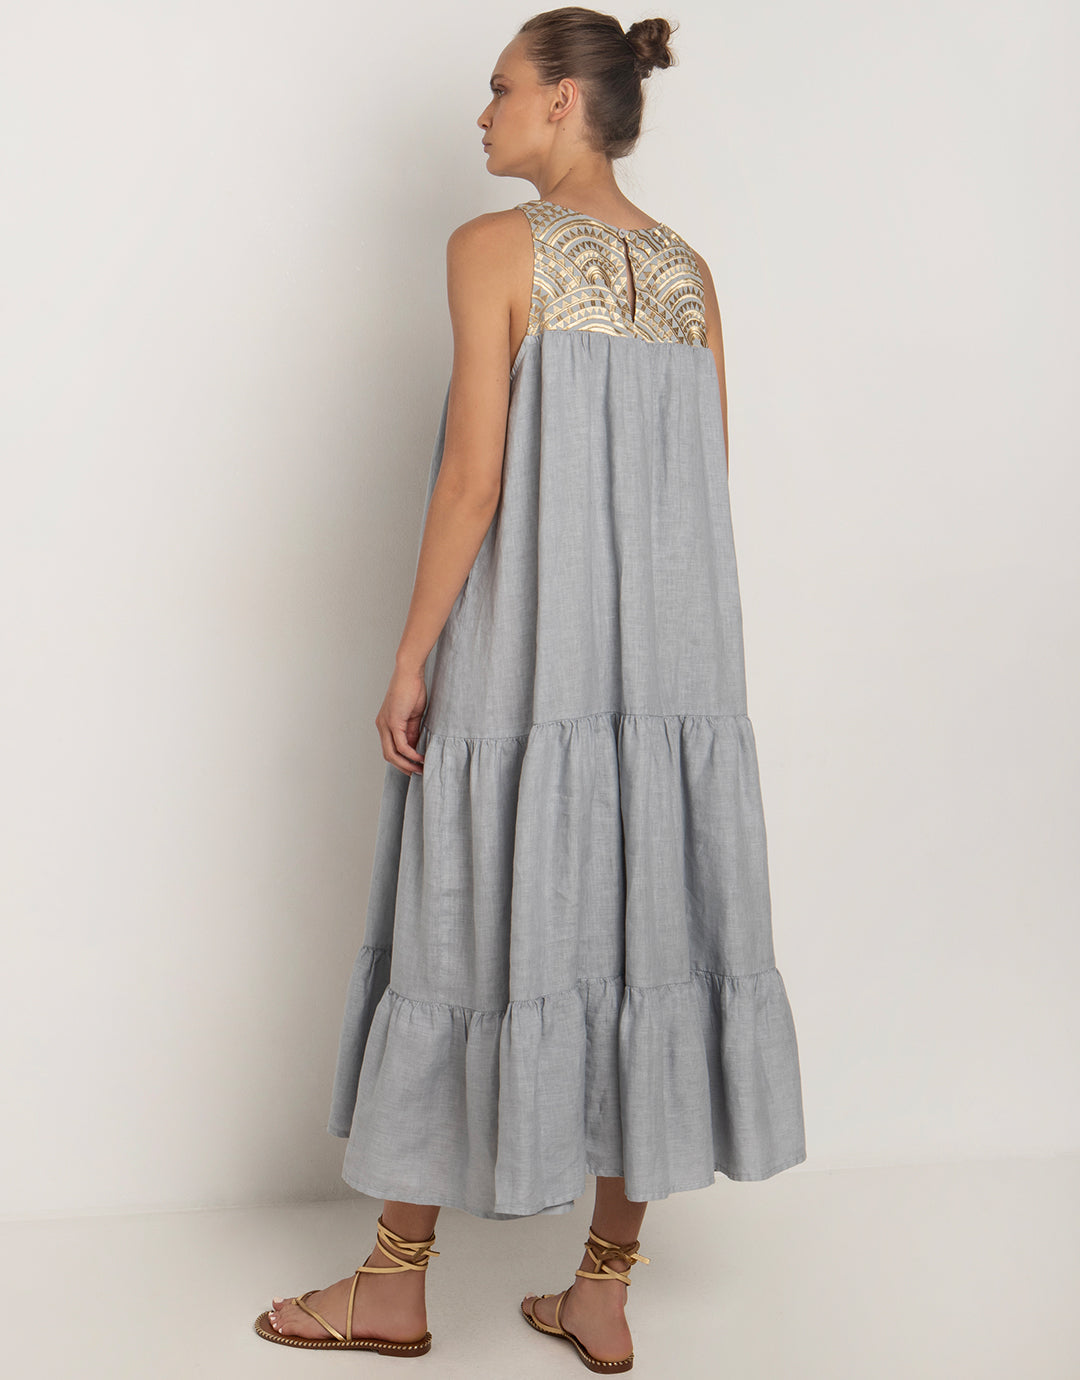 New Triangle Maxi Dress - Light Grey and Gold - Simply Beach UK